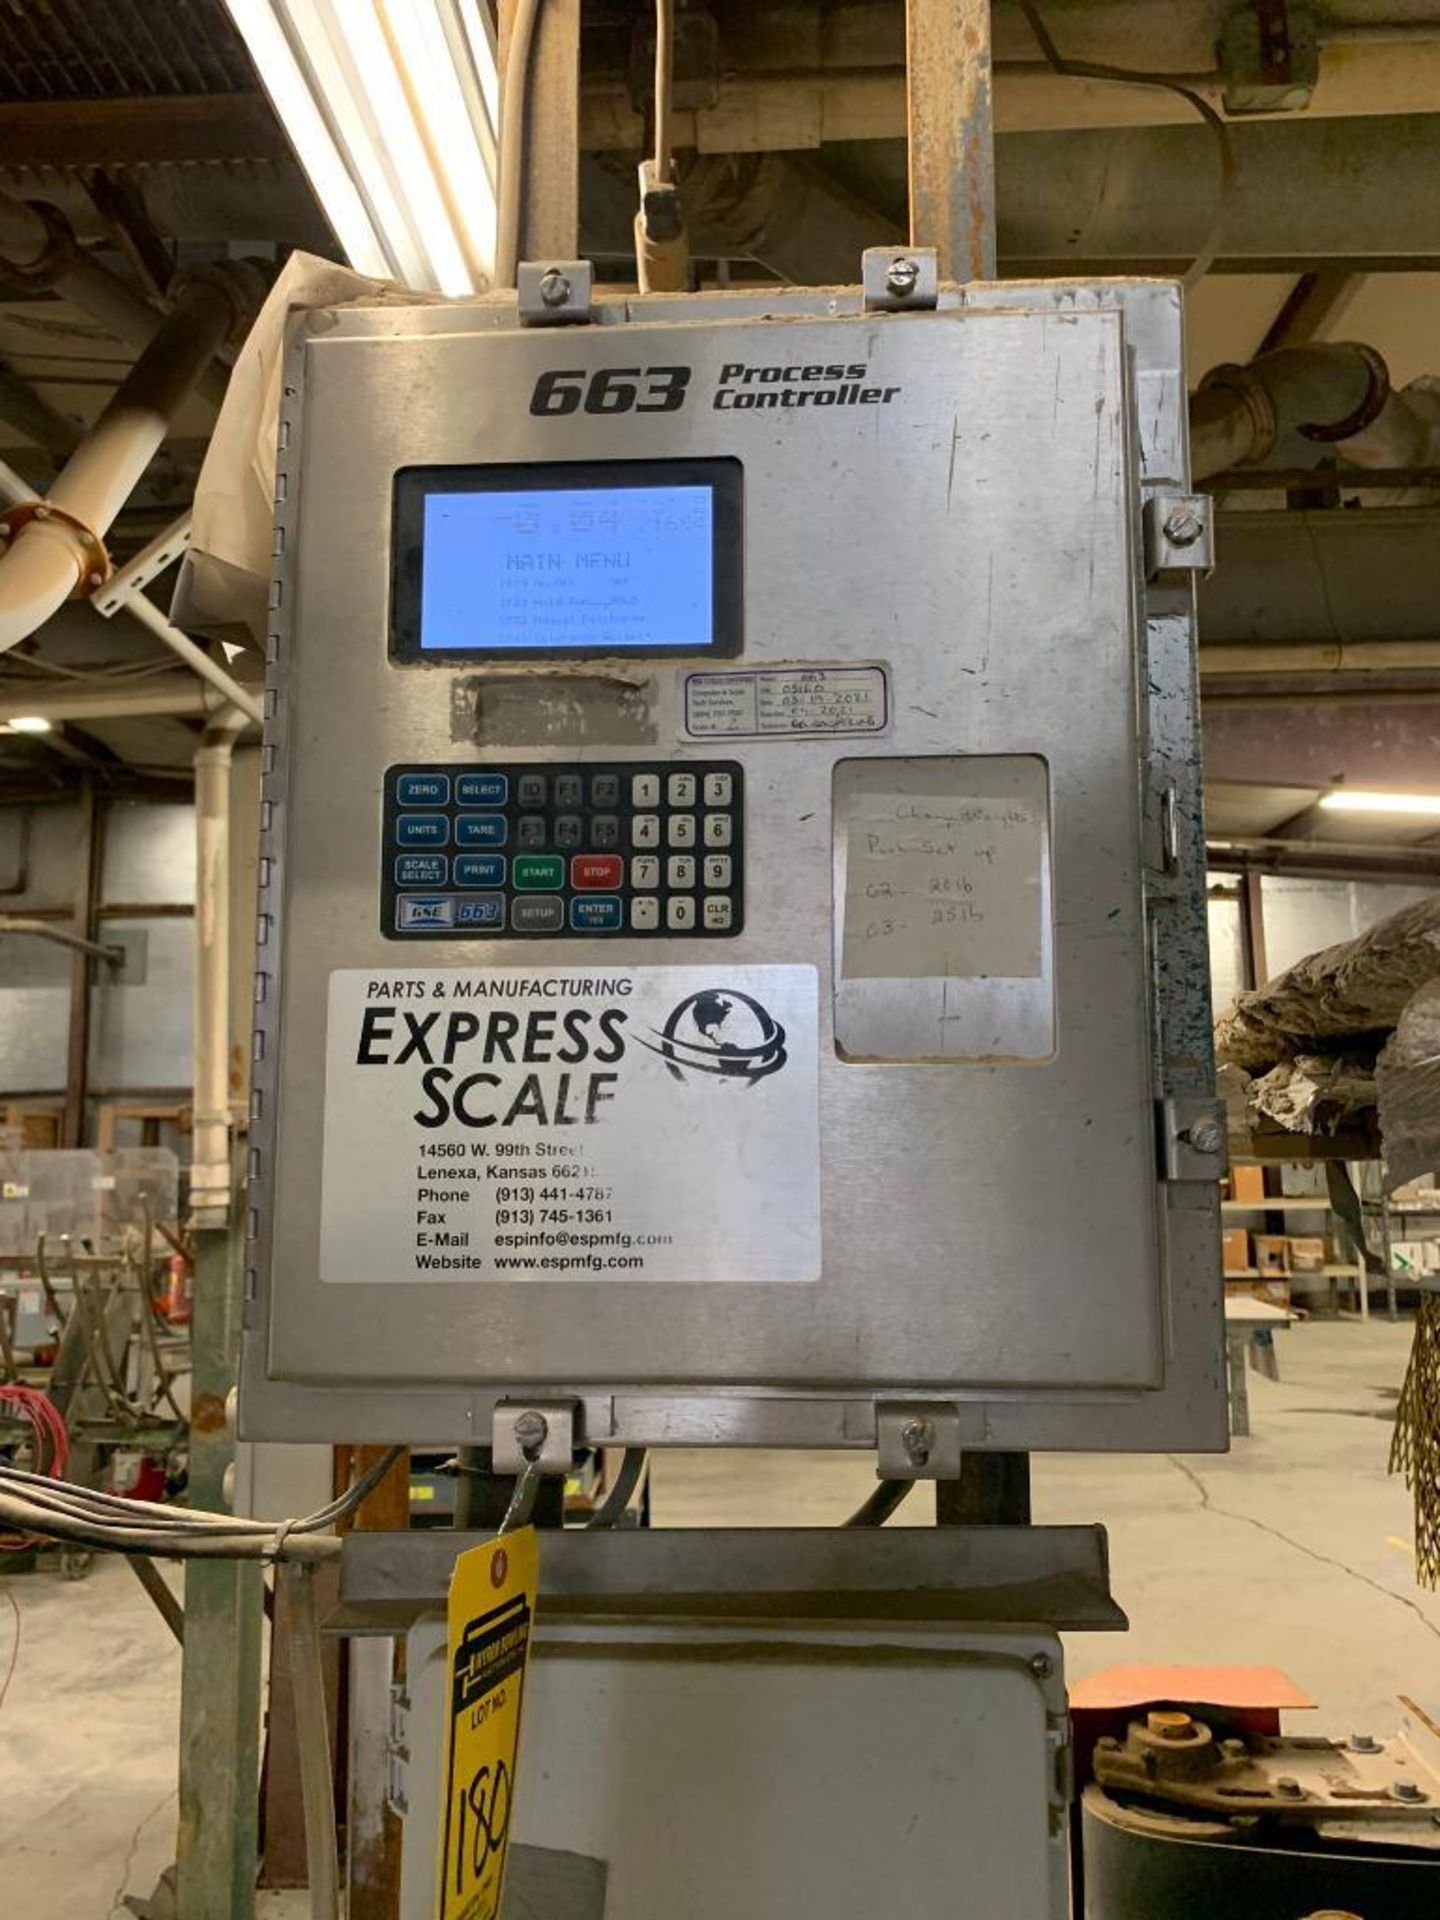 Express Scale Weigh Feed Hopper, Model 663 Process Controller